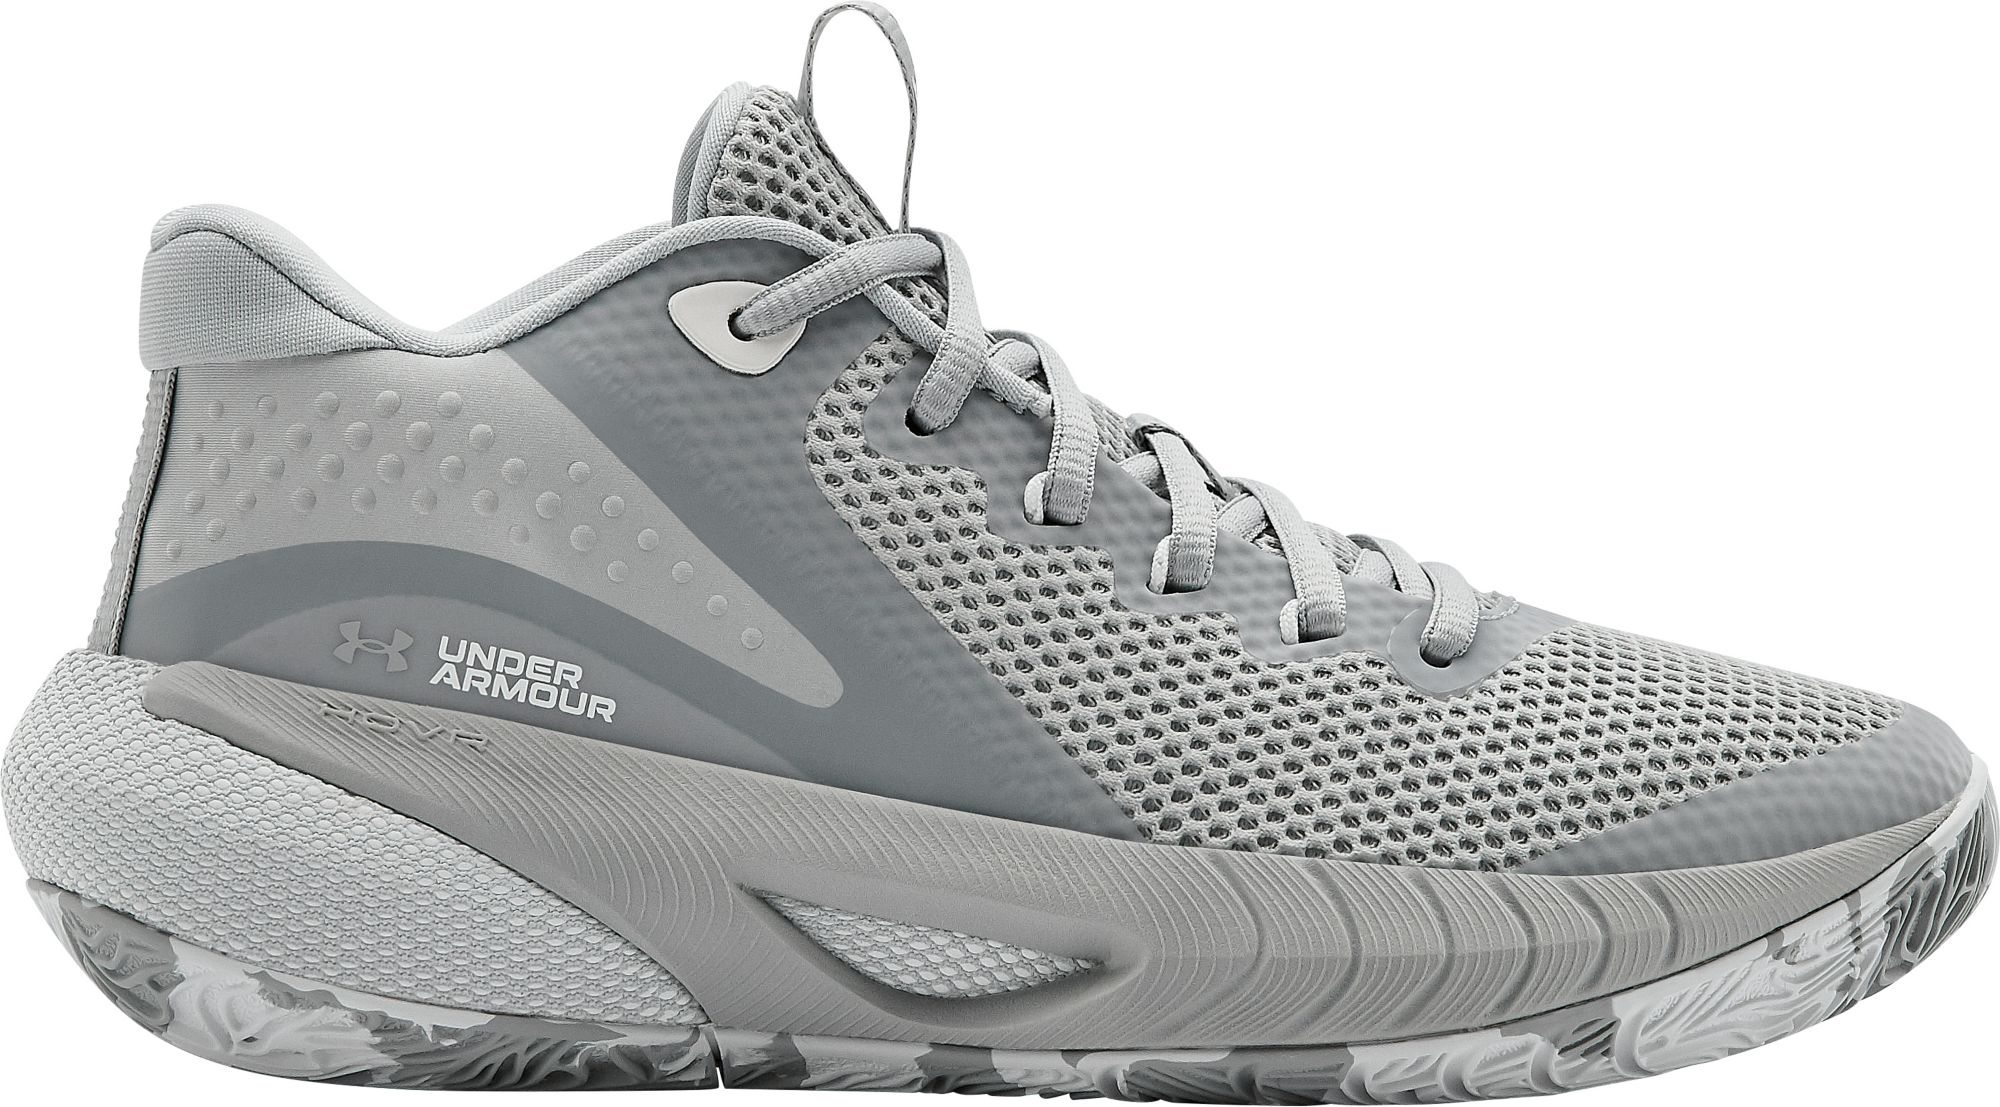 under armor womens basketball shoes